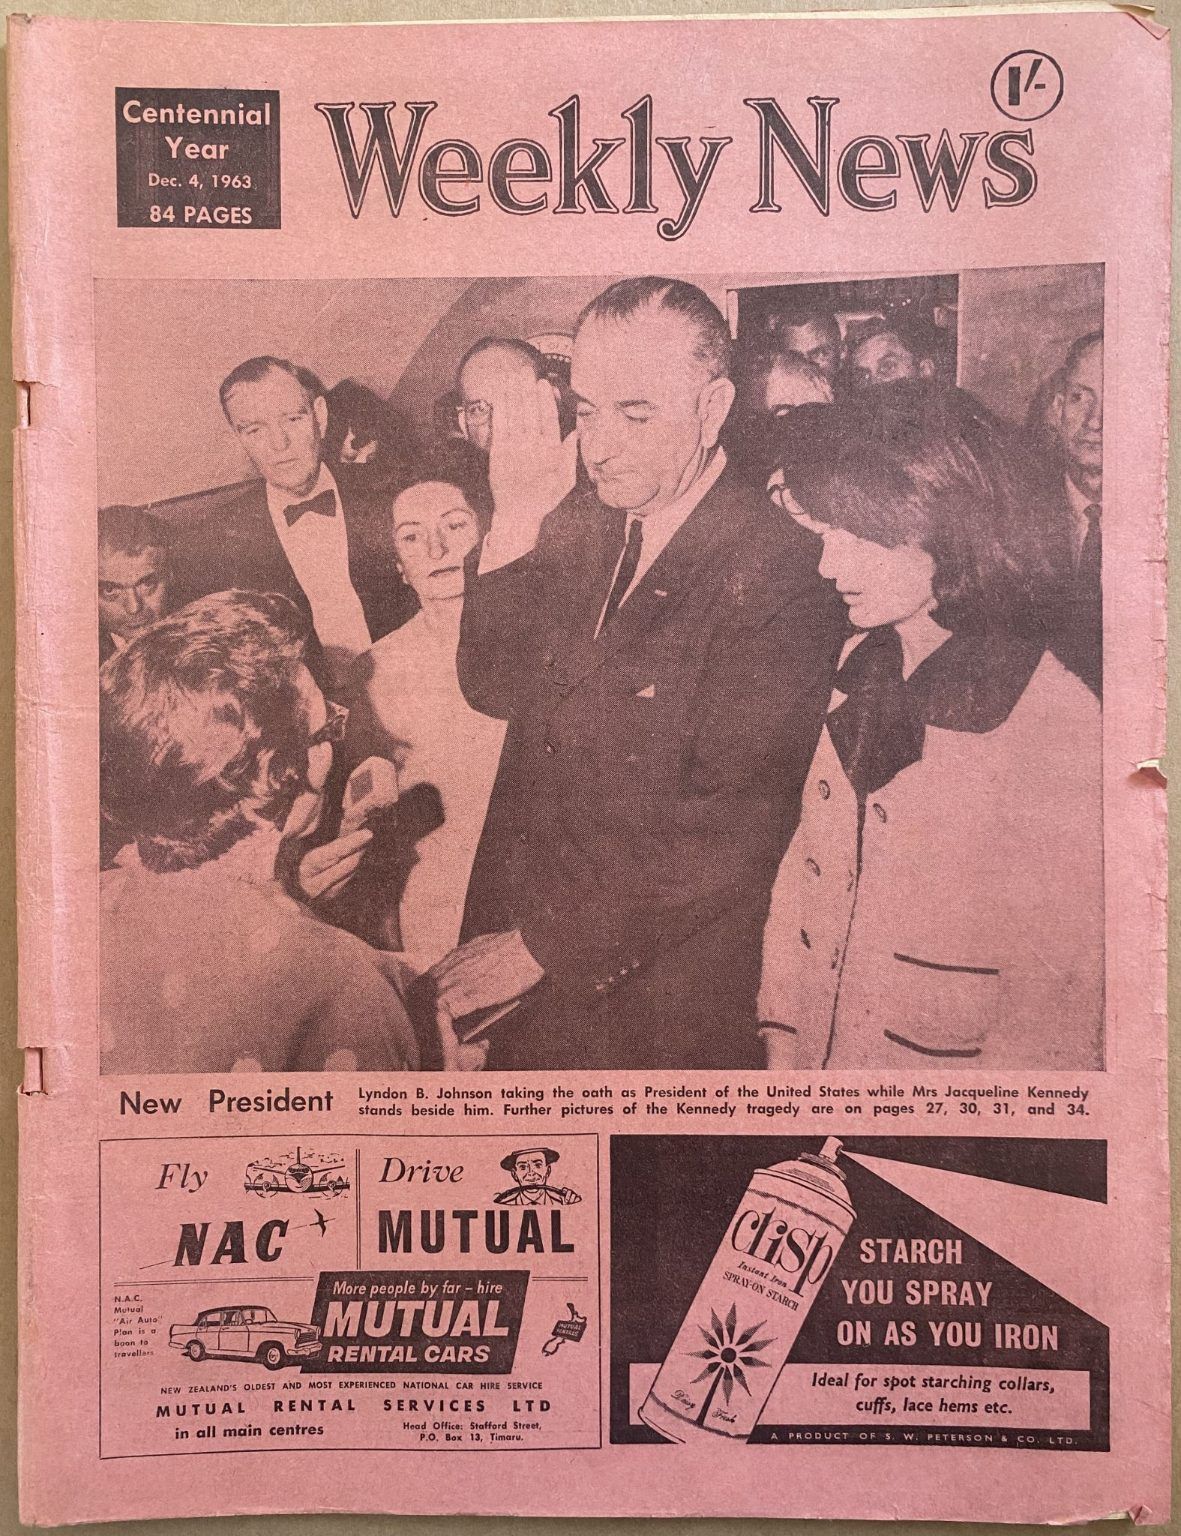 OLD NEWSPAPER: The Weekly News, No. 5219, 4 December 1963